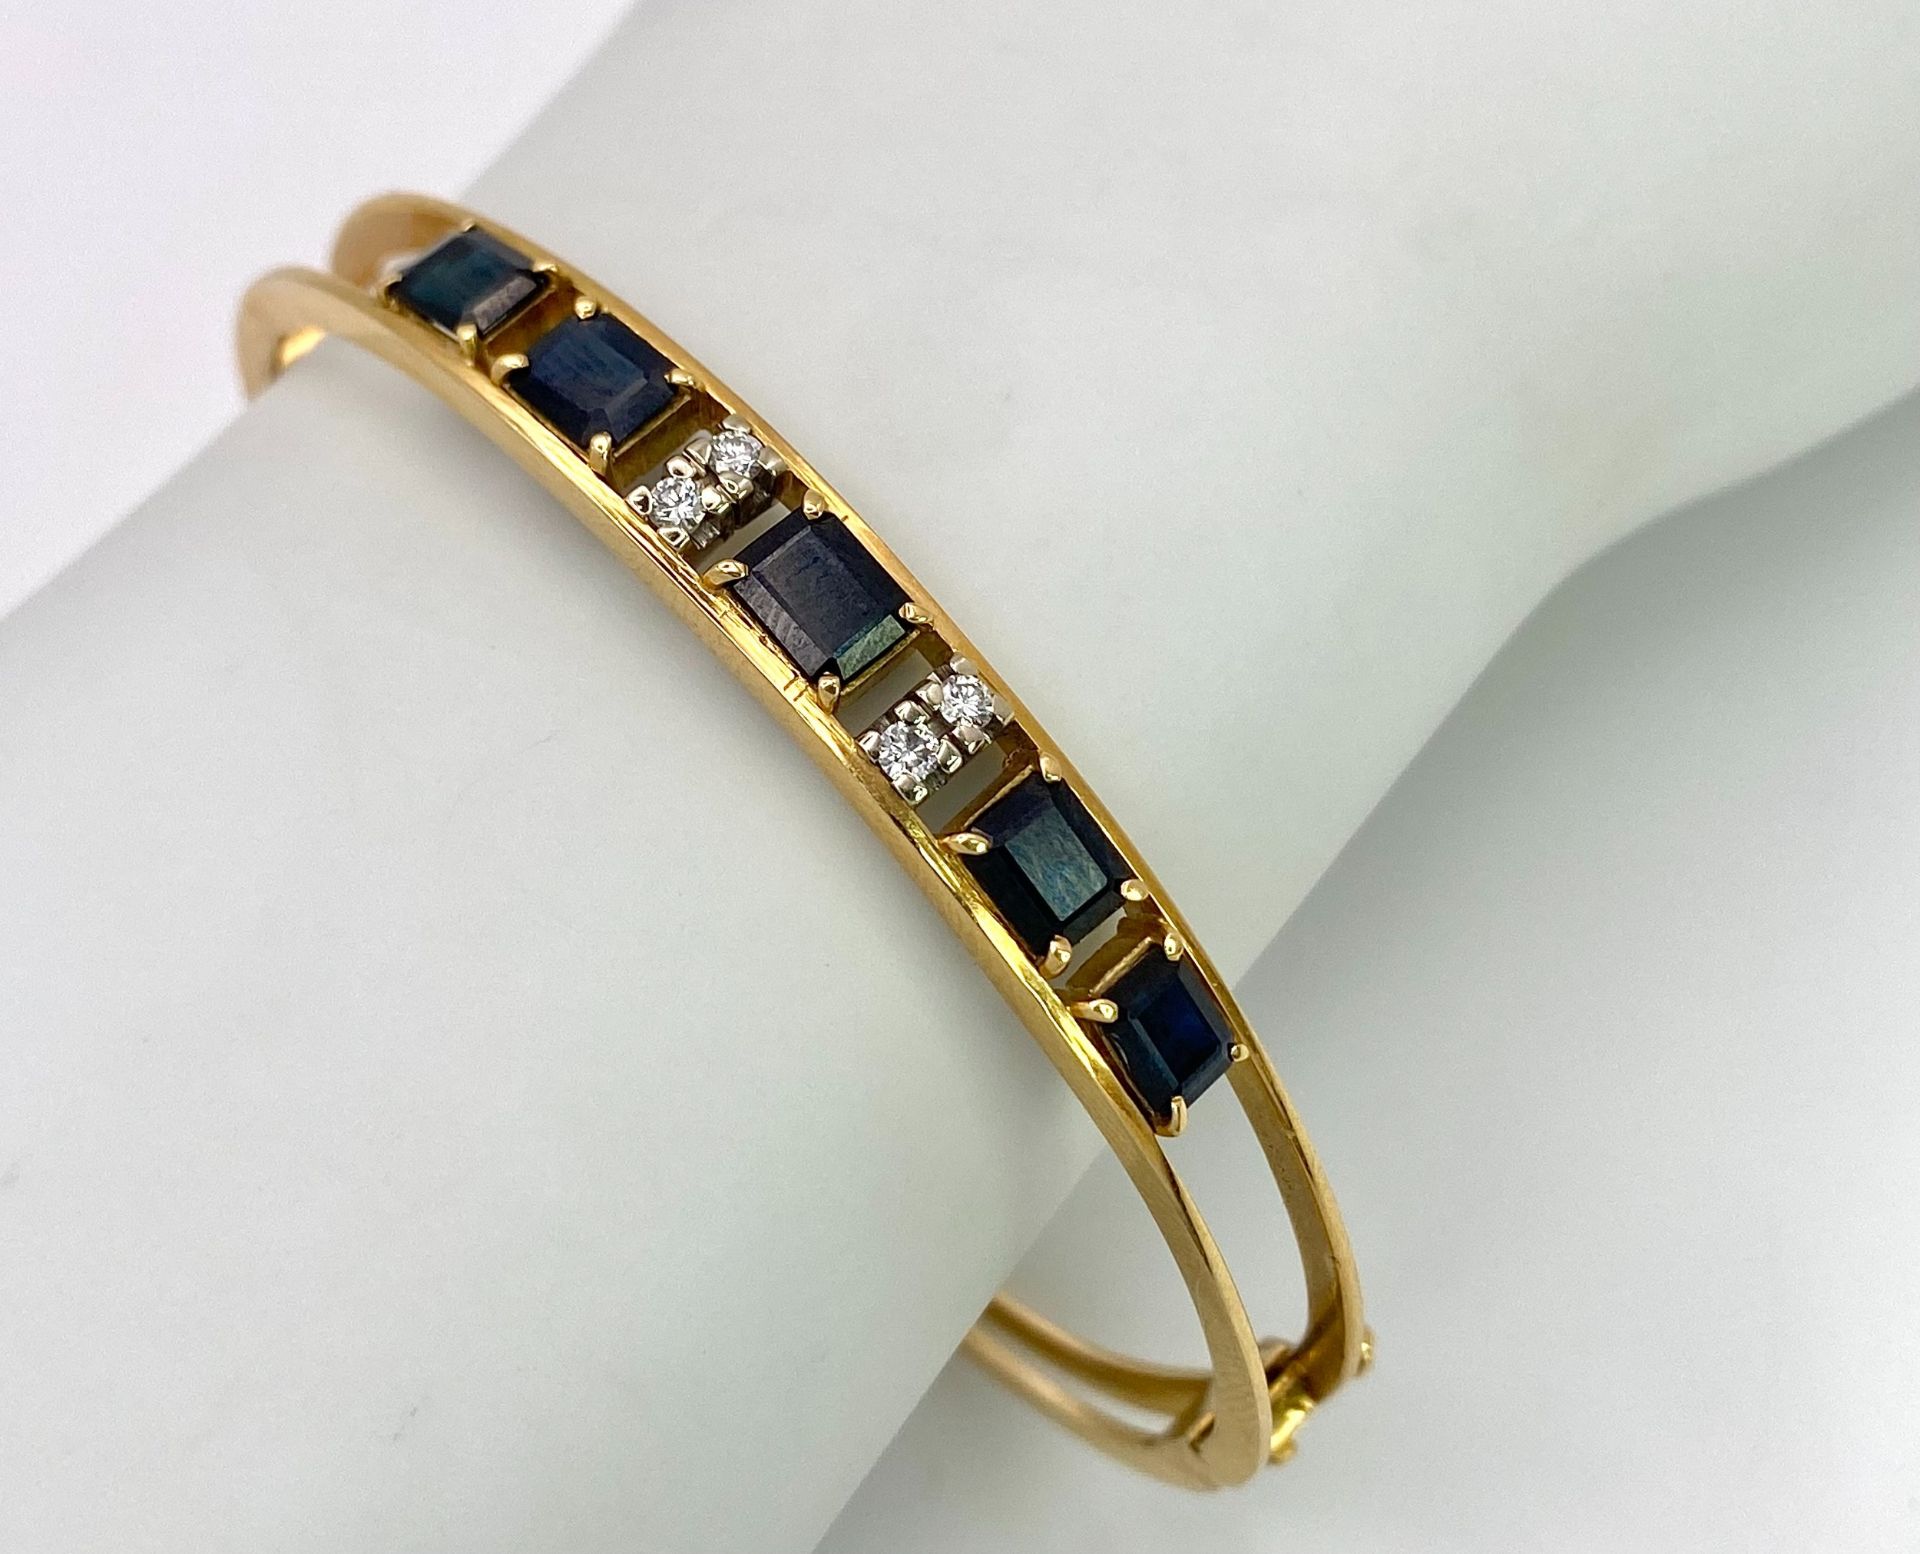 A 14K (TESTED AS) YELLOW GOLD BANGLE SET WITH 5 SAPPHIRES AND 4 DIAMONDS, 6CM DIAMETER, 15.9G (DIA: - Image 2 of 6